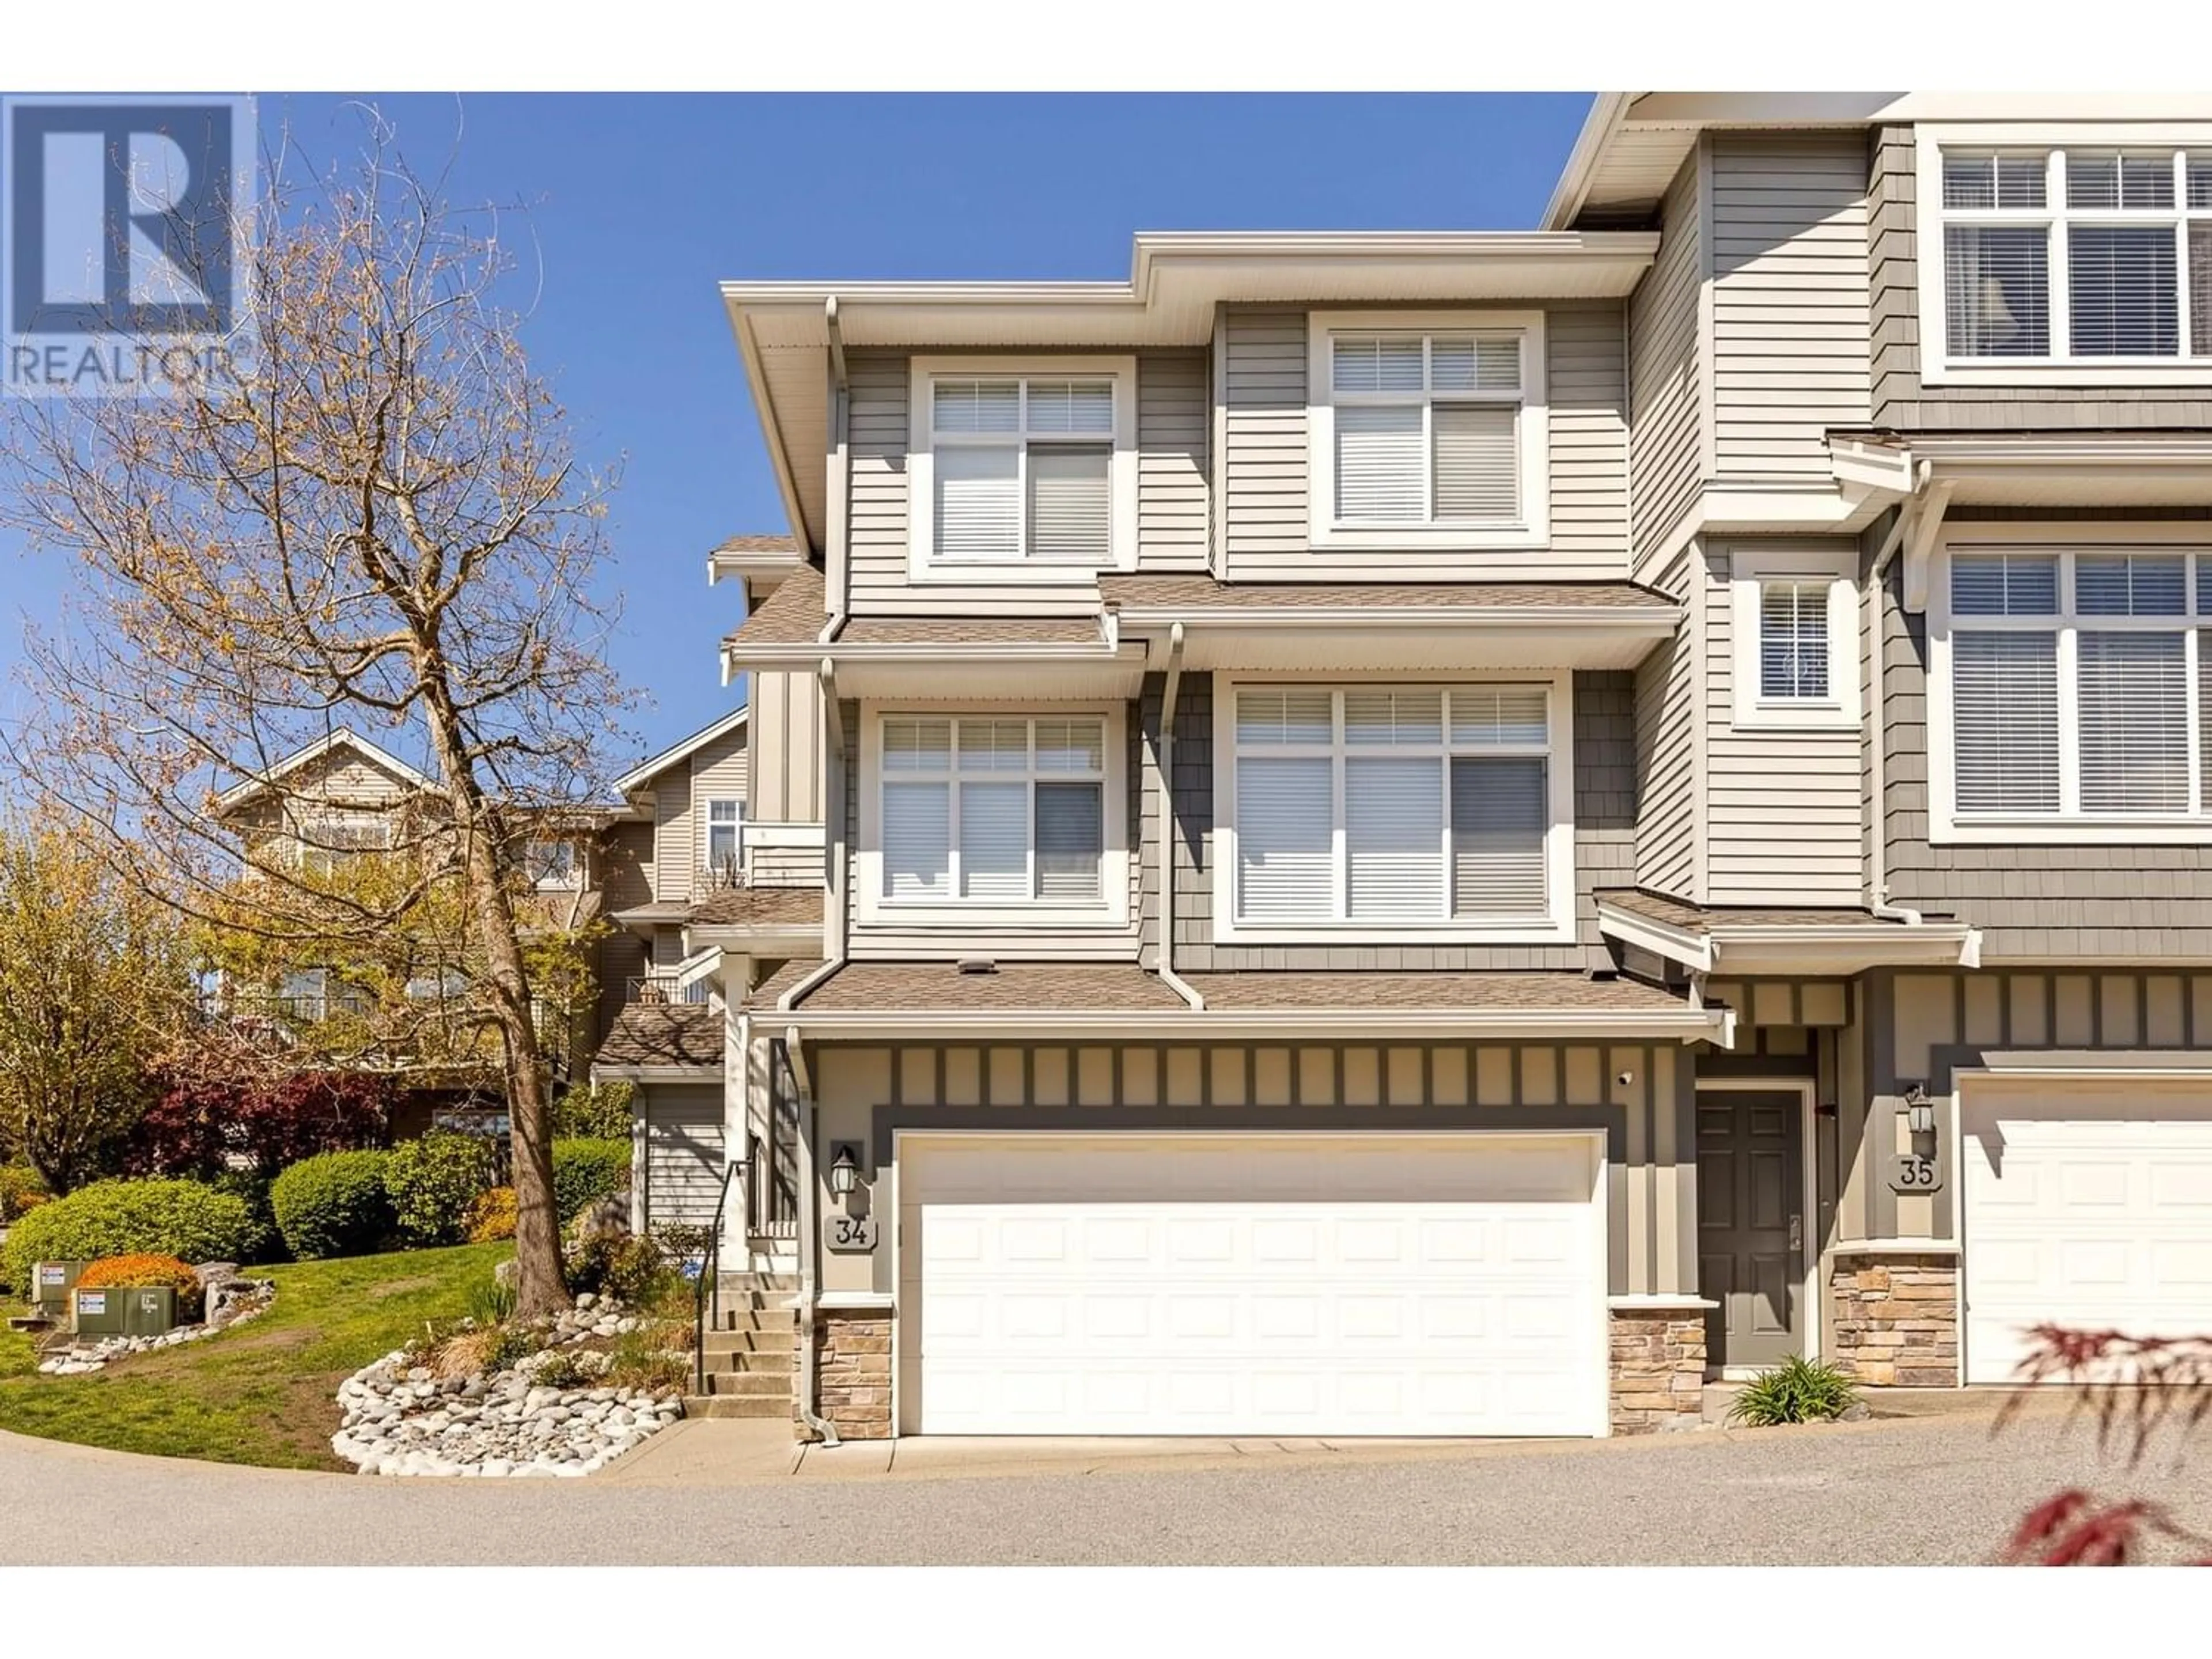 A pic from exterior of the house or condo for 34 11282 COTTONWOOD DRIVE, Maple Ridge British Columbia V2X8W7